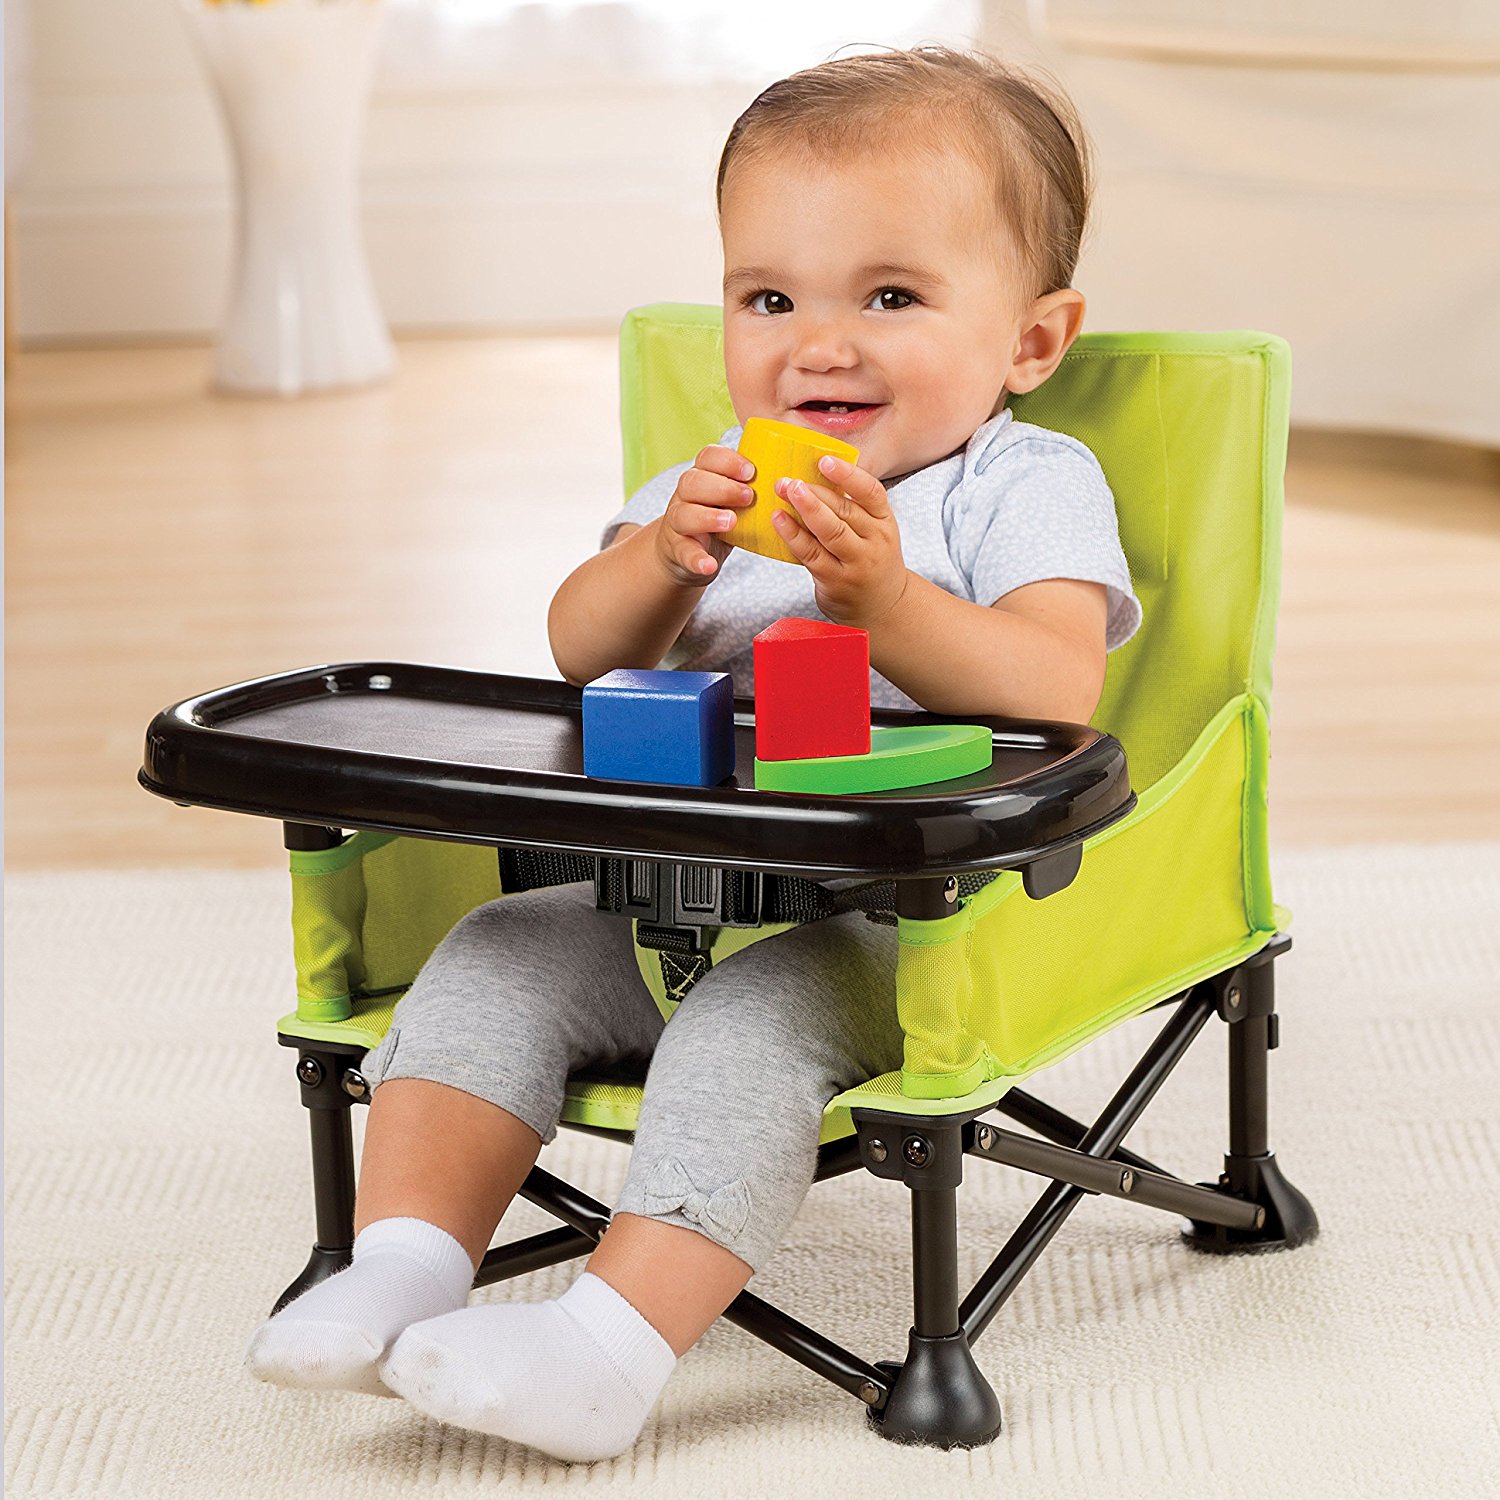 Amazon.com : Summer Infant Pop and Sit Portable Booster, Green/Grey ...